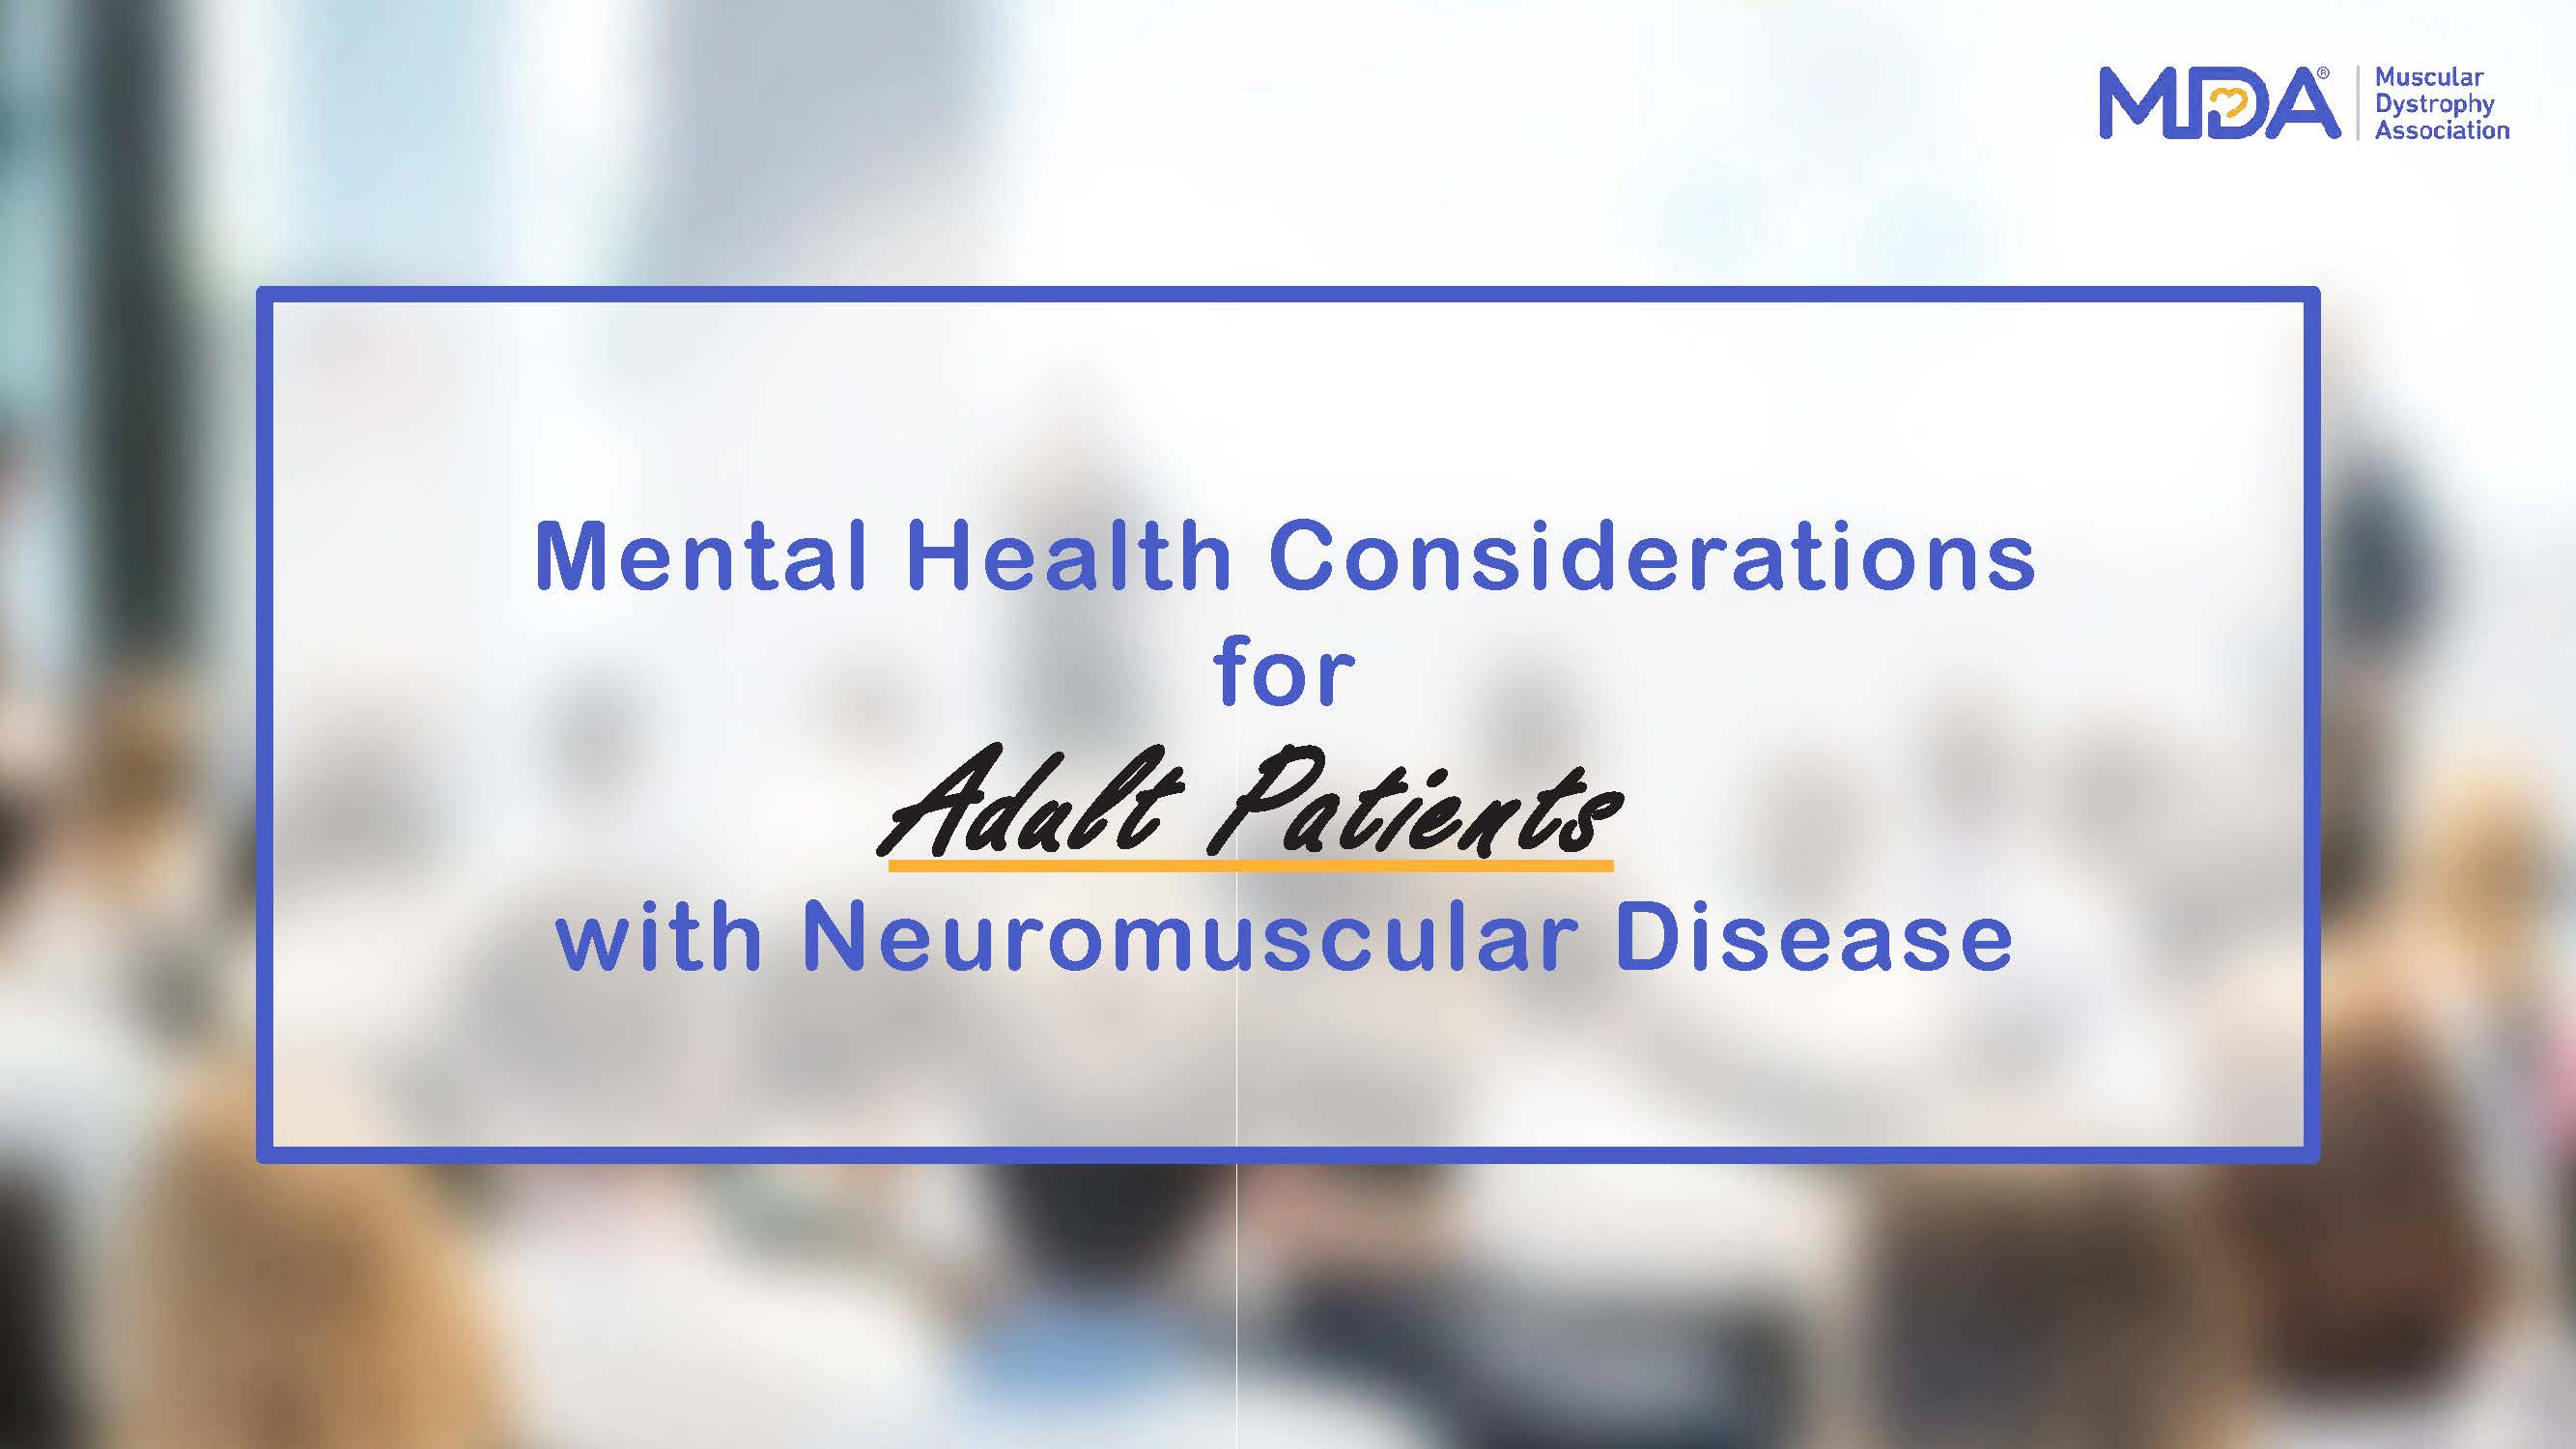 Mental Health Considerations for Adult Patients with Neuromuscular Disease